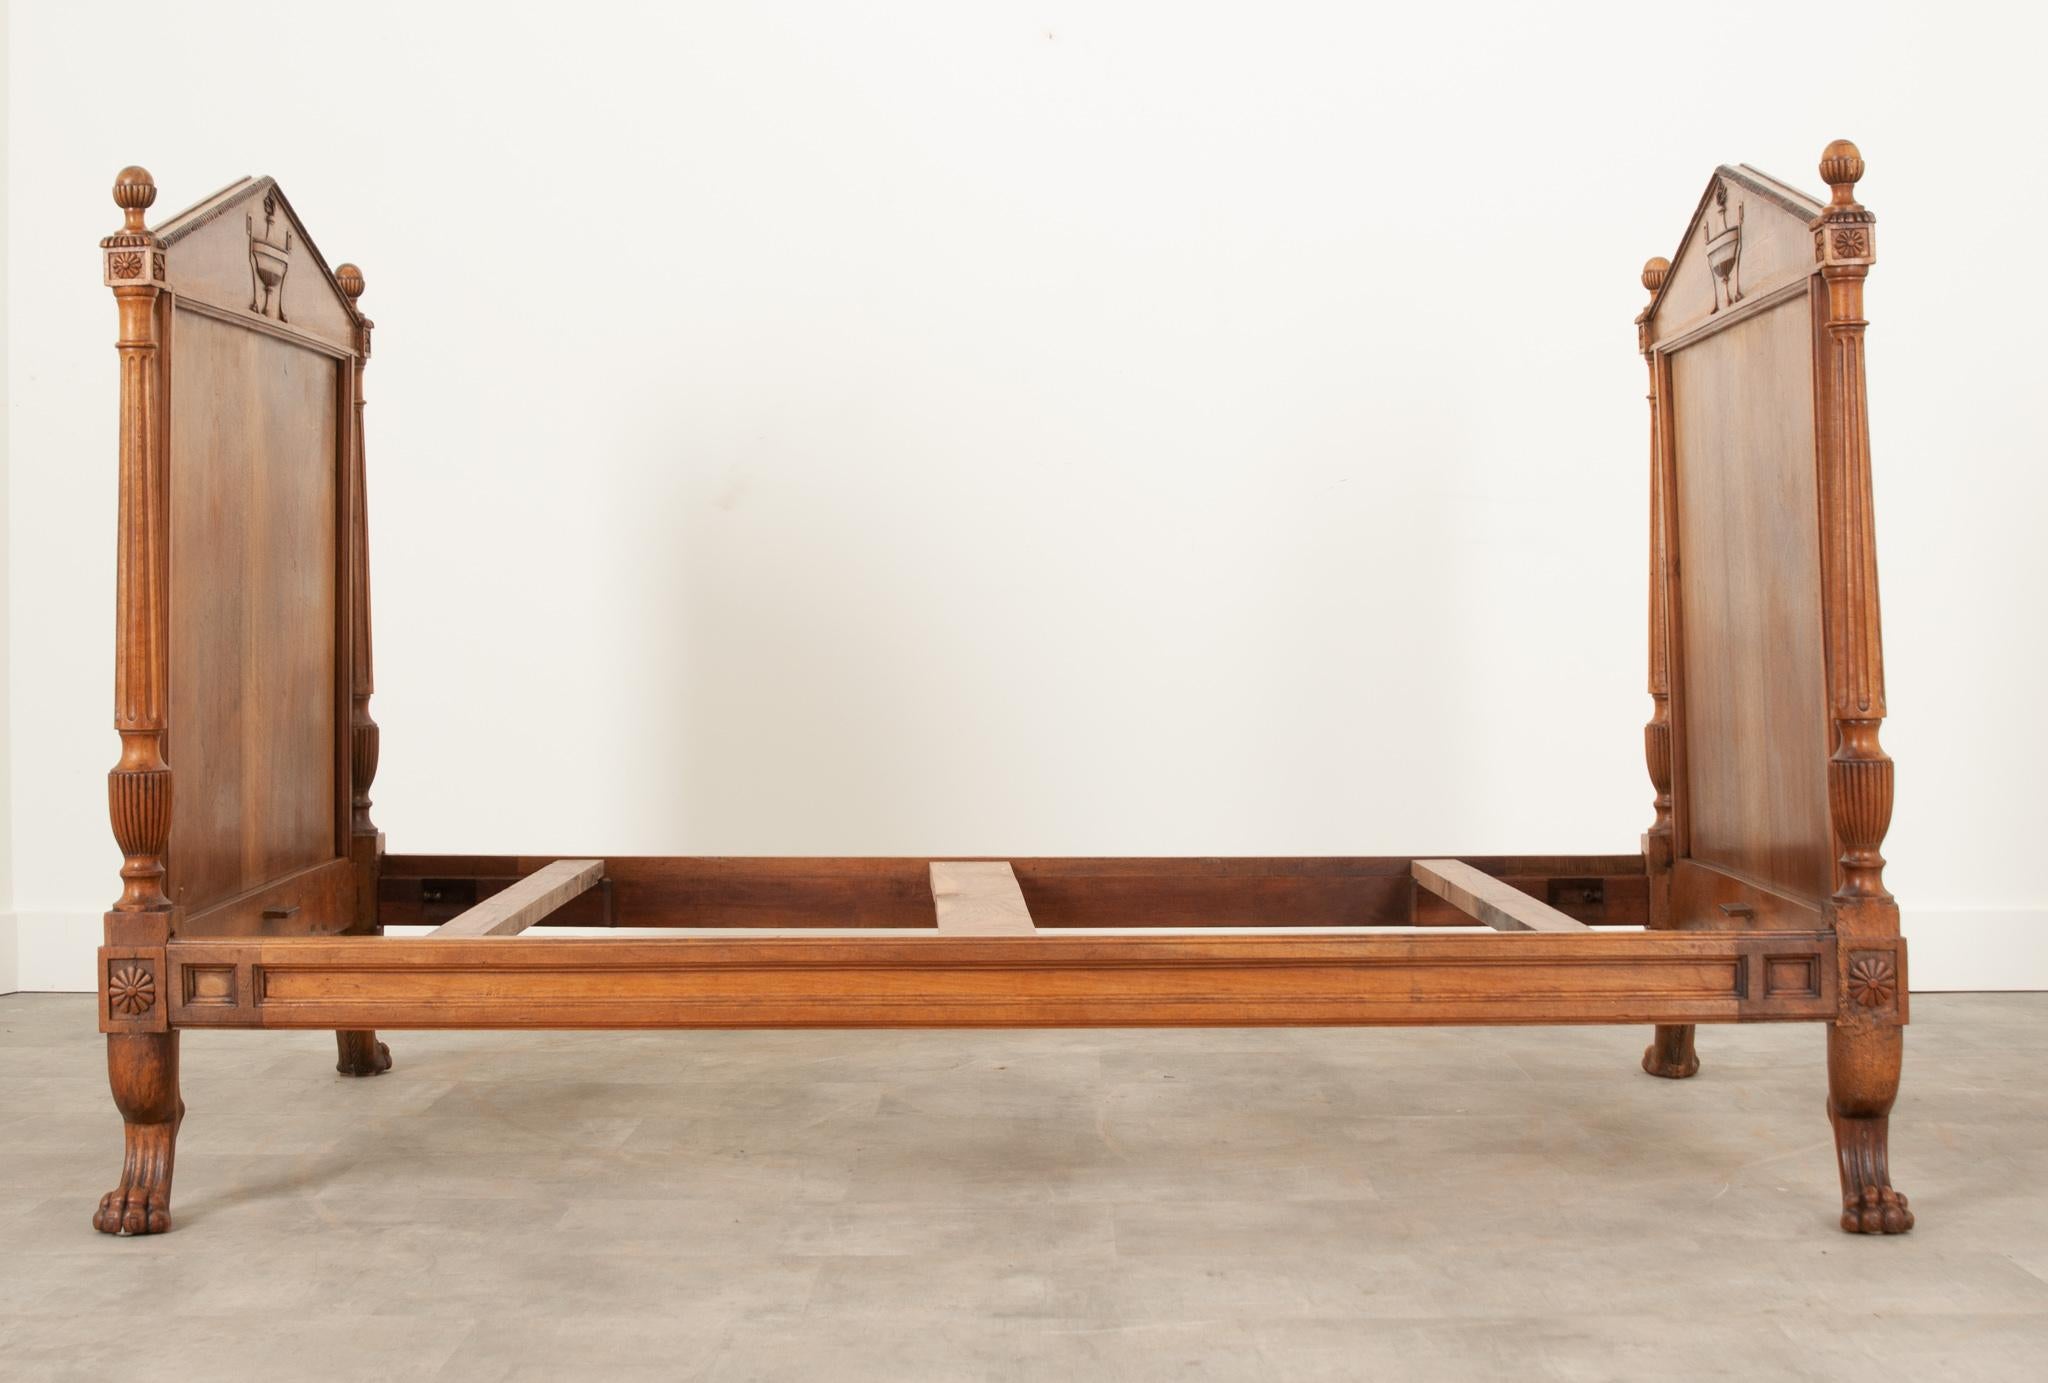 A fabulous walnut daybed with stately presence from 19th century Netherlands. The bed’s head and foot boards are topped with pediments featuring beautifully carved tazza style urns. The urns have handles that loop and extend to the ground with paw